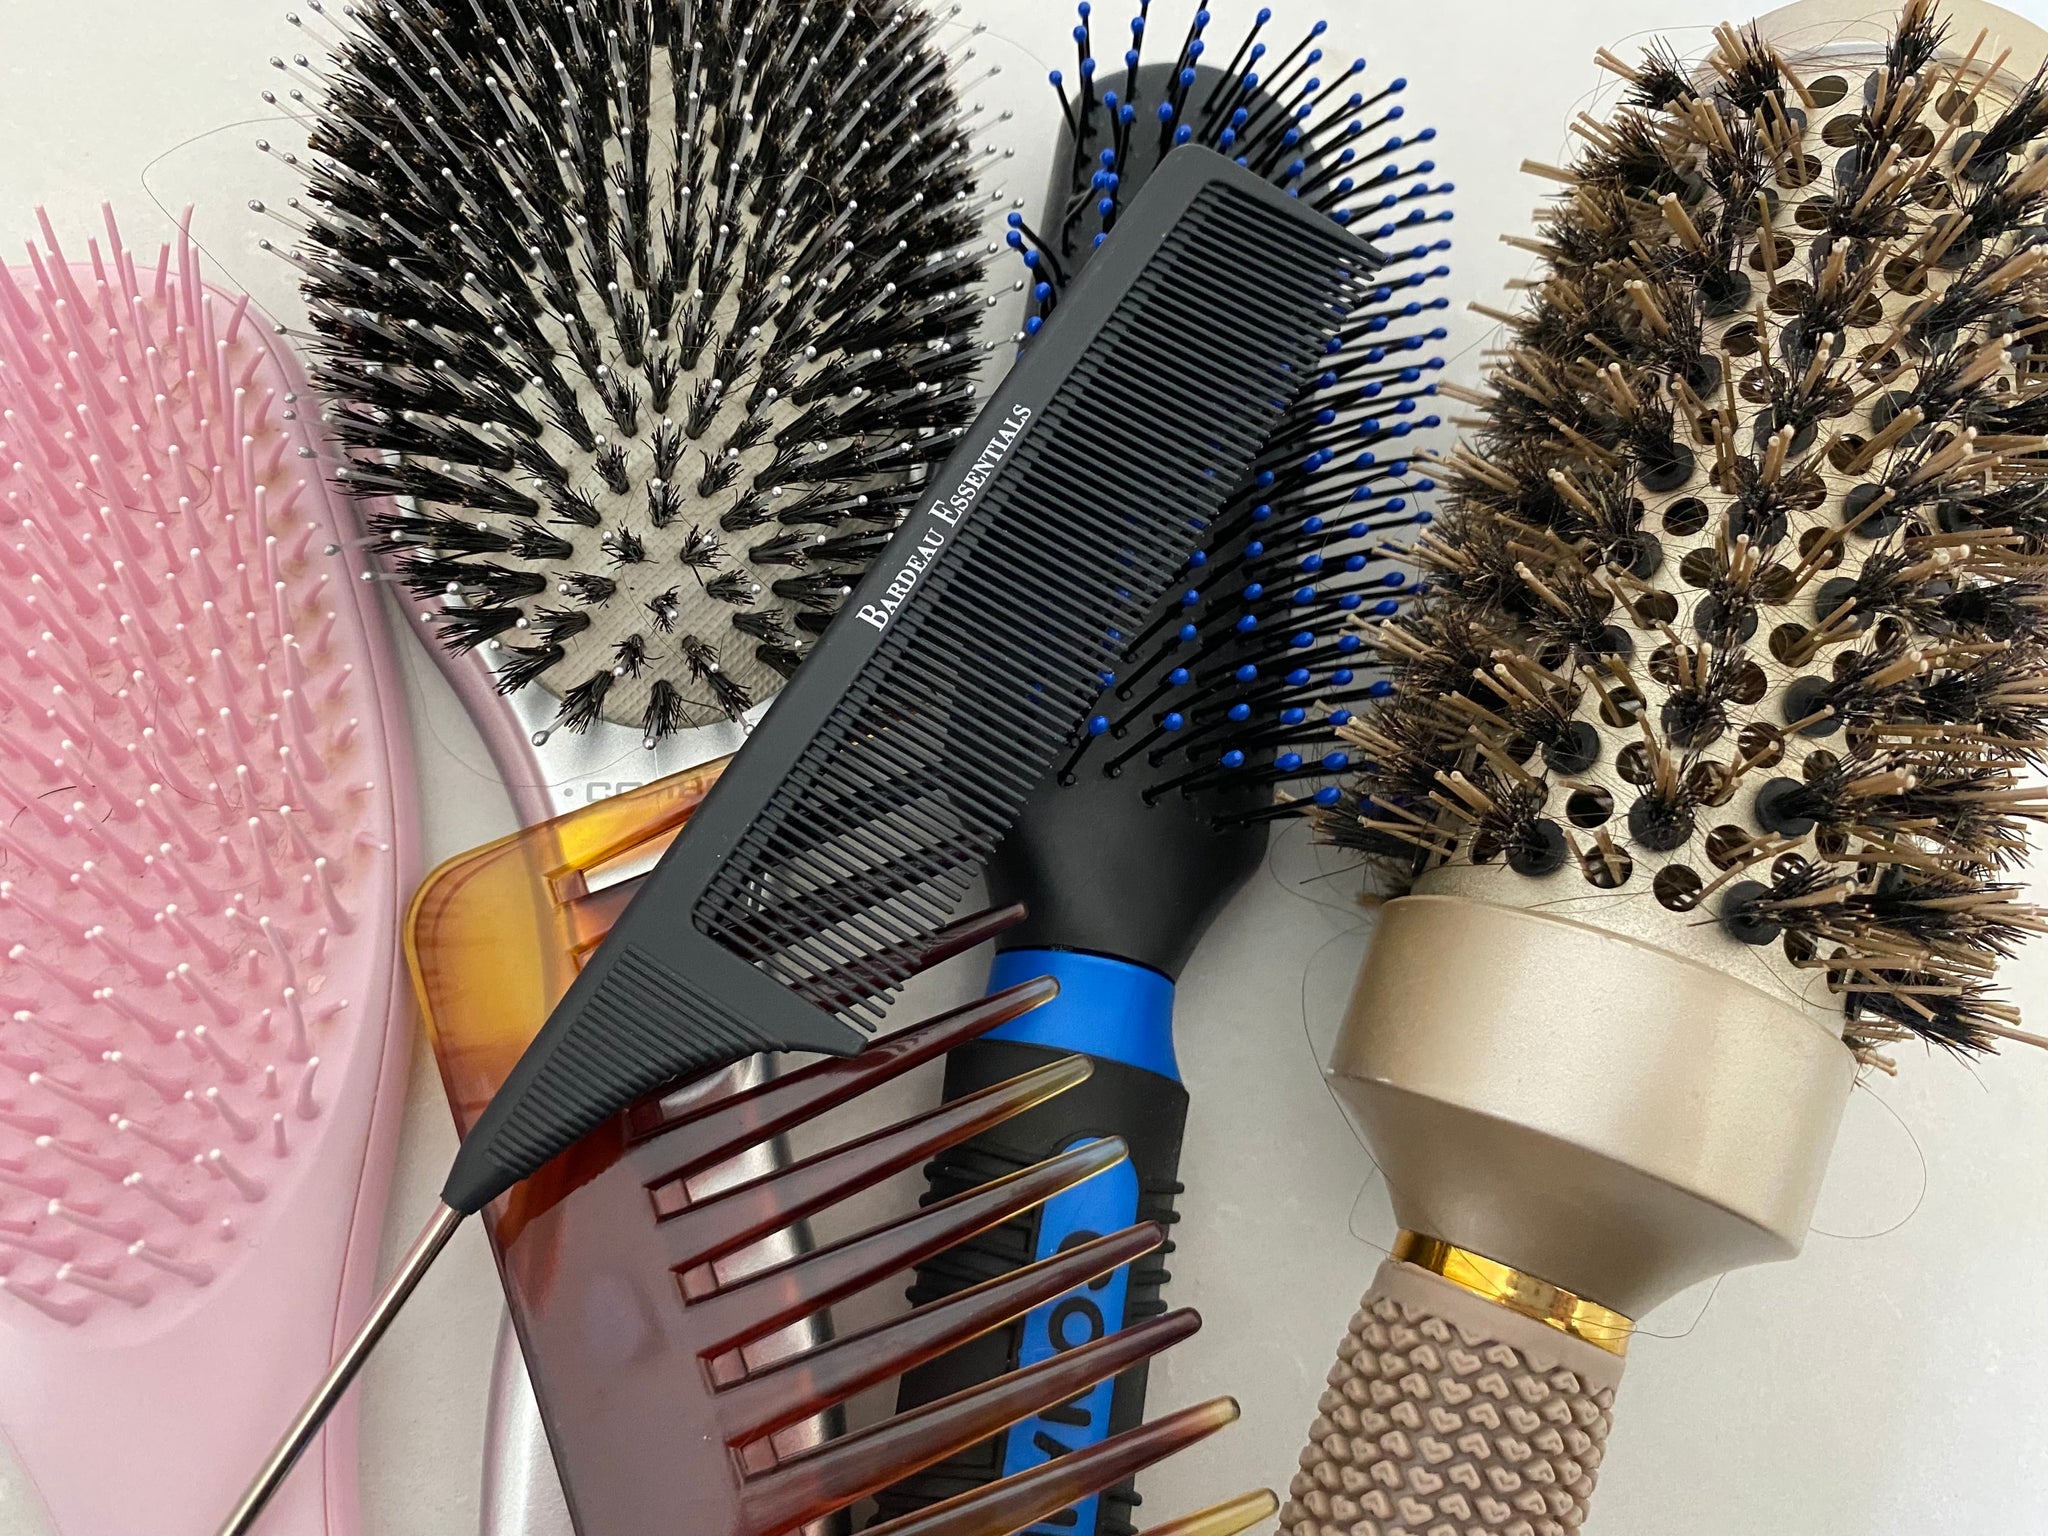 11 Different Types of Hair Brushes and Their Uses